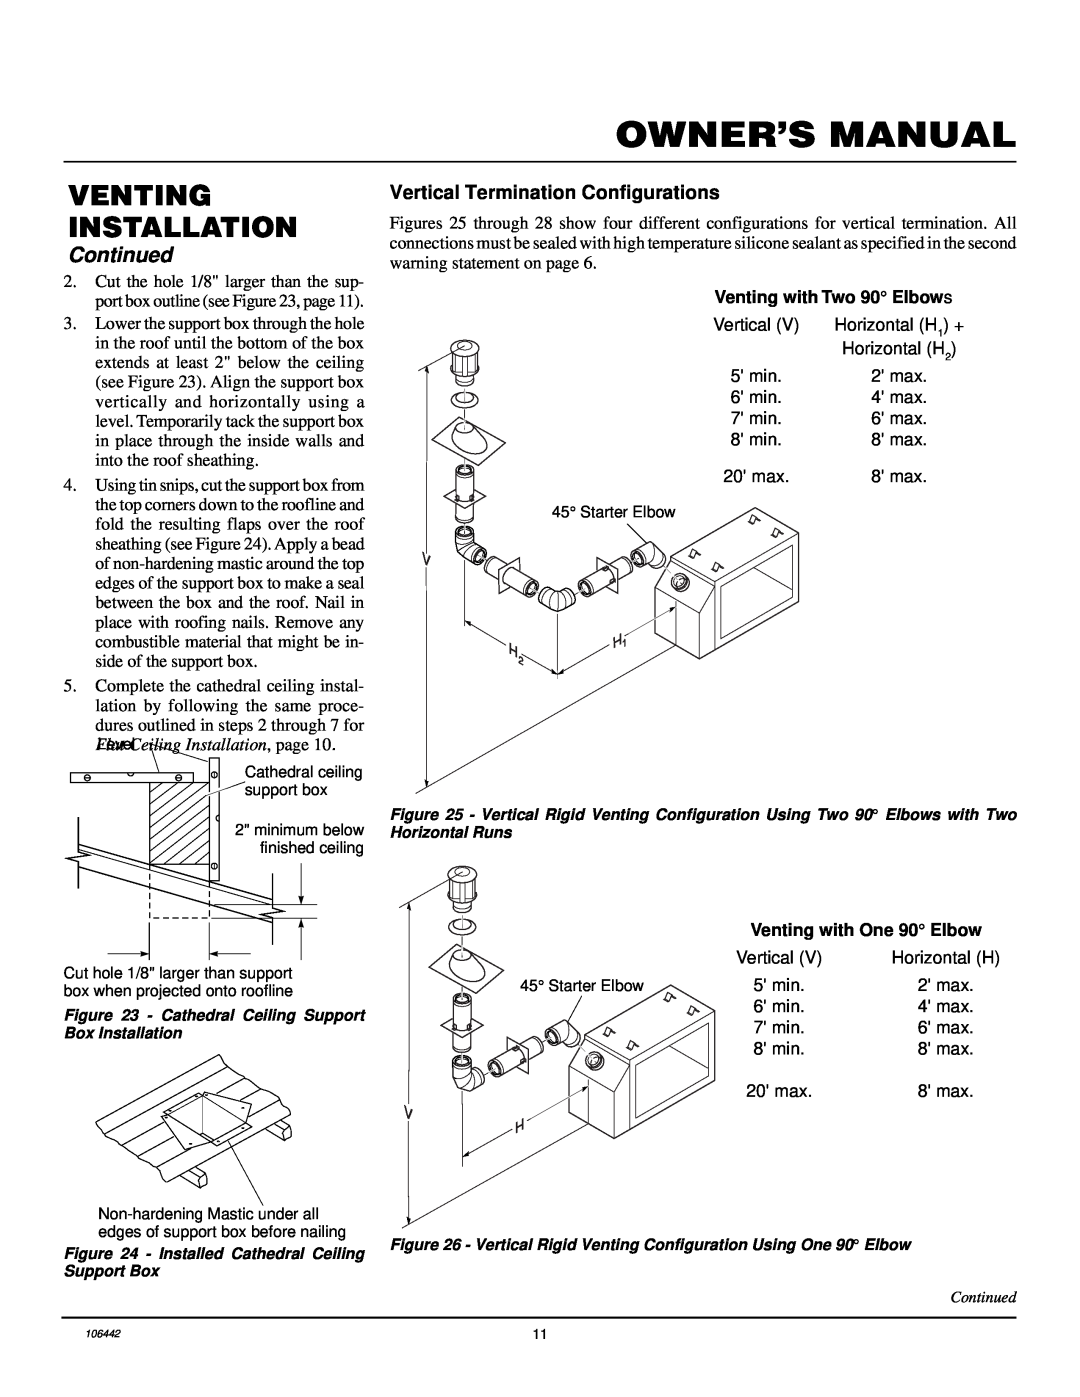 Desa MDVFST Vertical Termination Configurations, Venting with One 90 Elbow, Venting Installation, Continued 